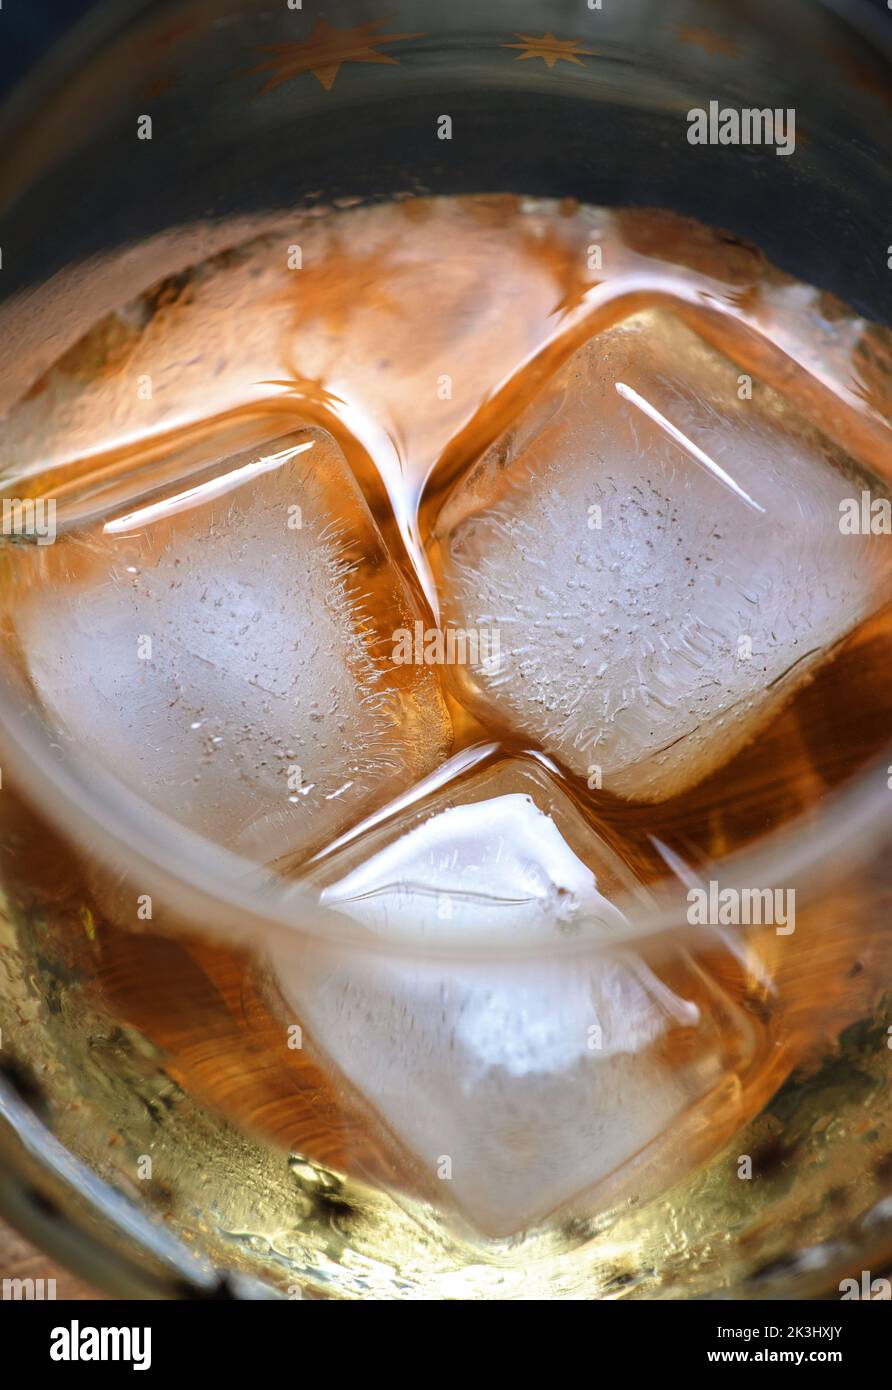 Close-up top view of iced whisky Stock Photo